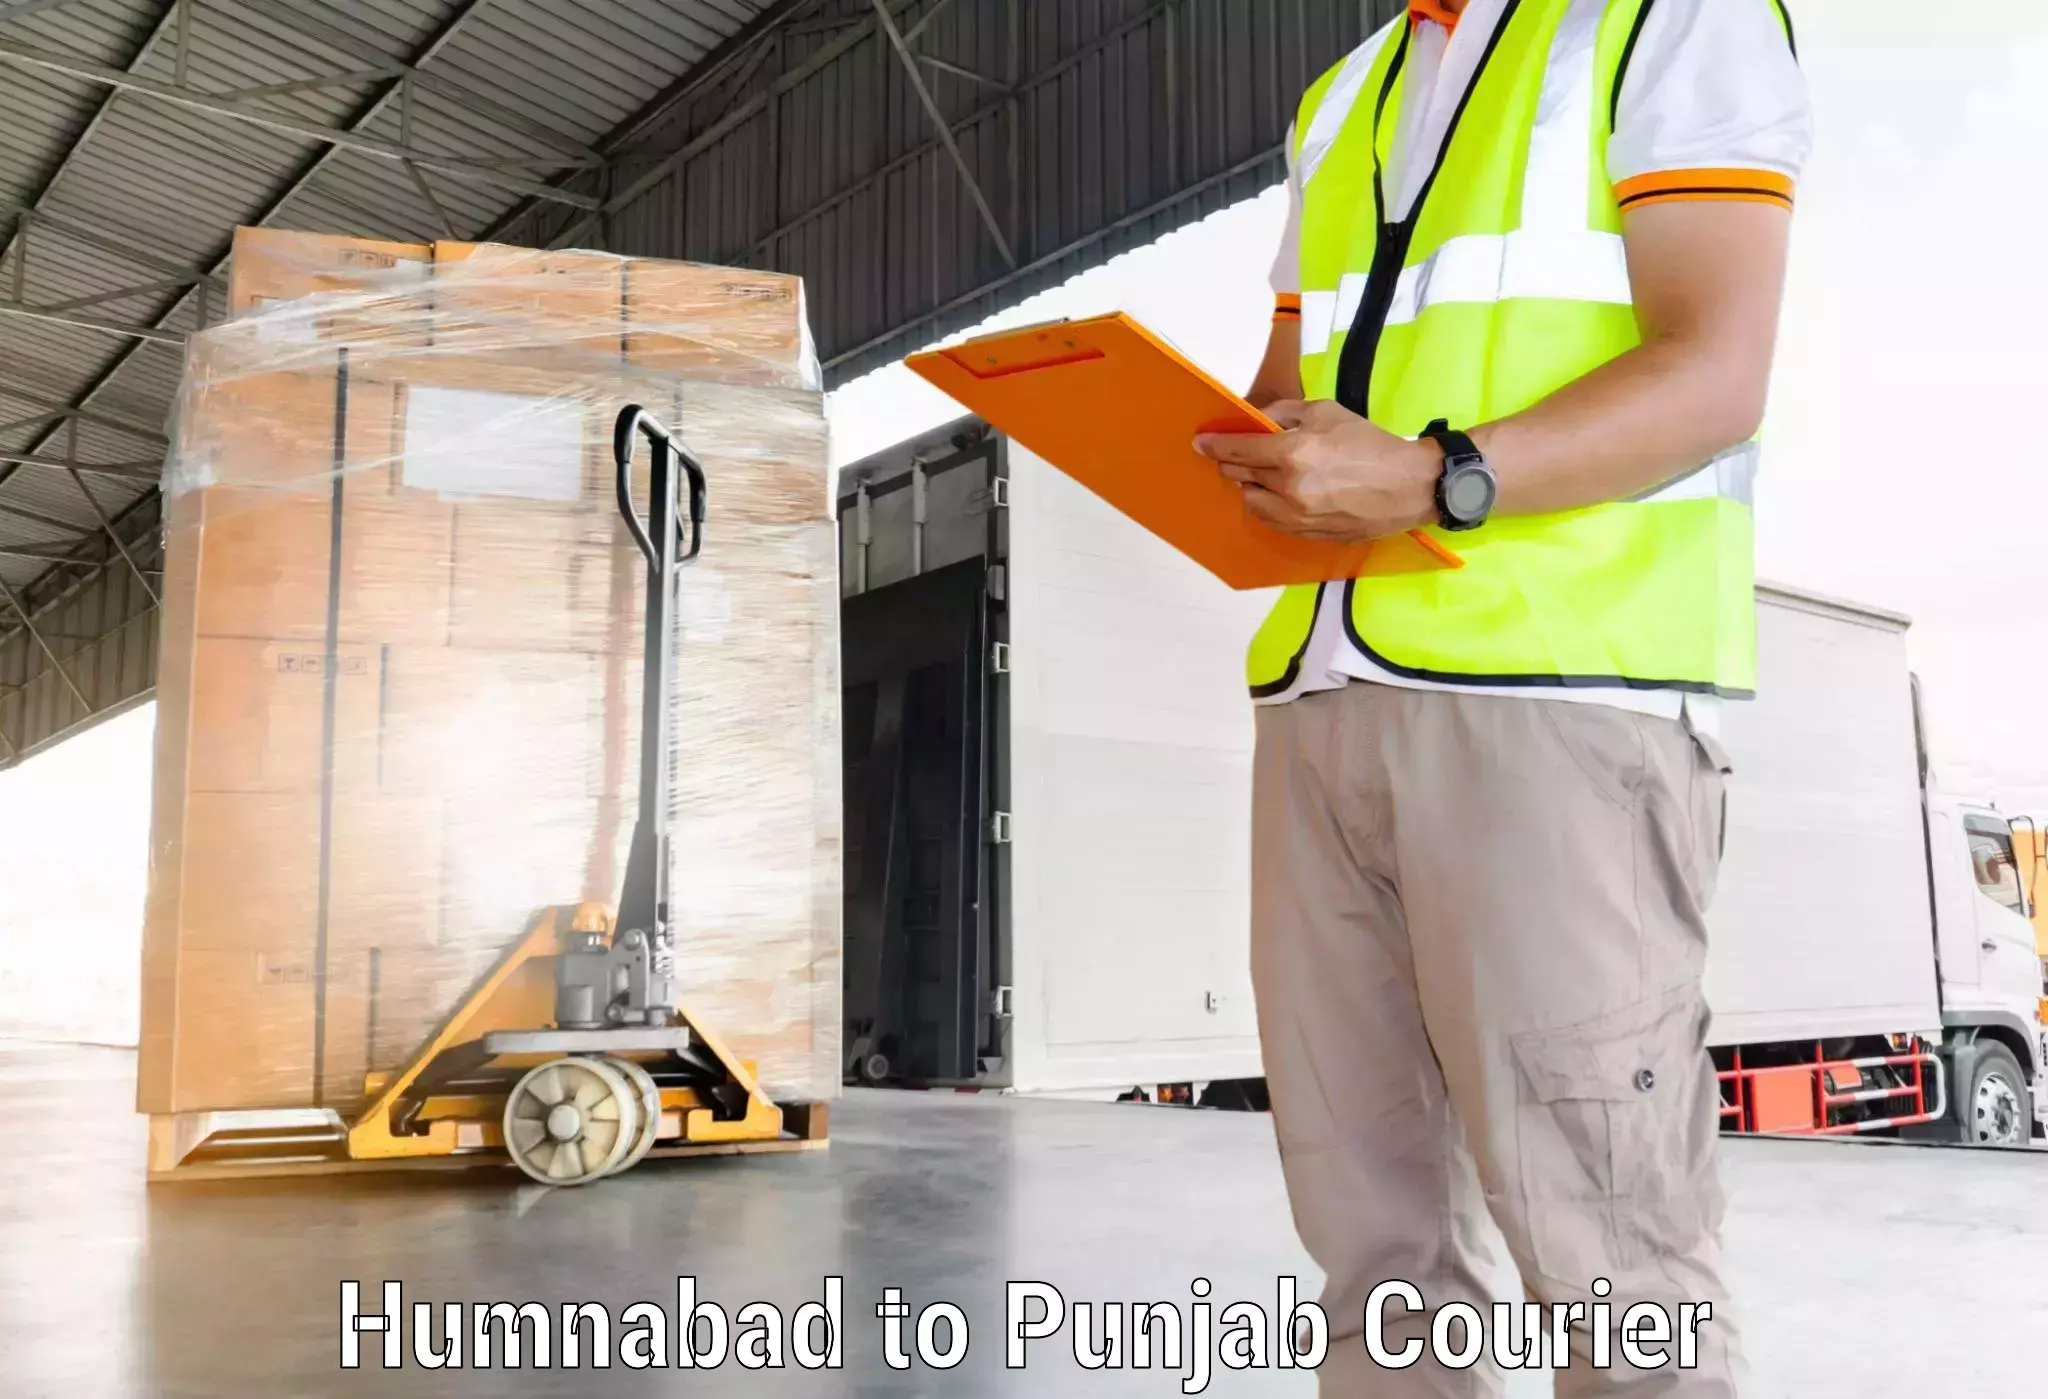 State-of-the-art courier technology Humnabad to Ajnala